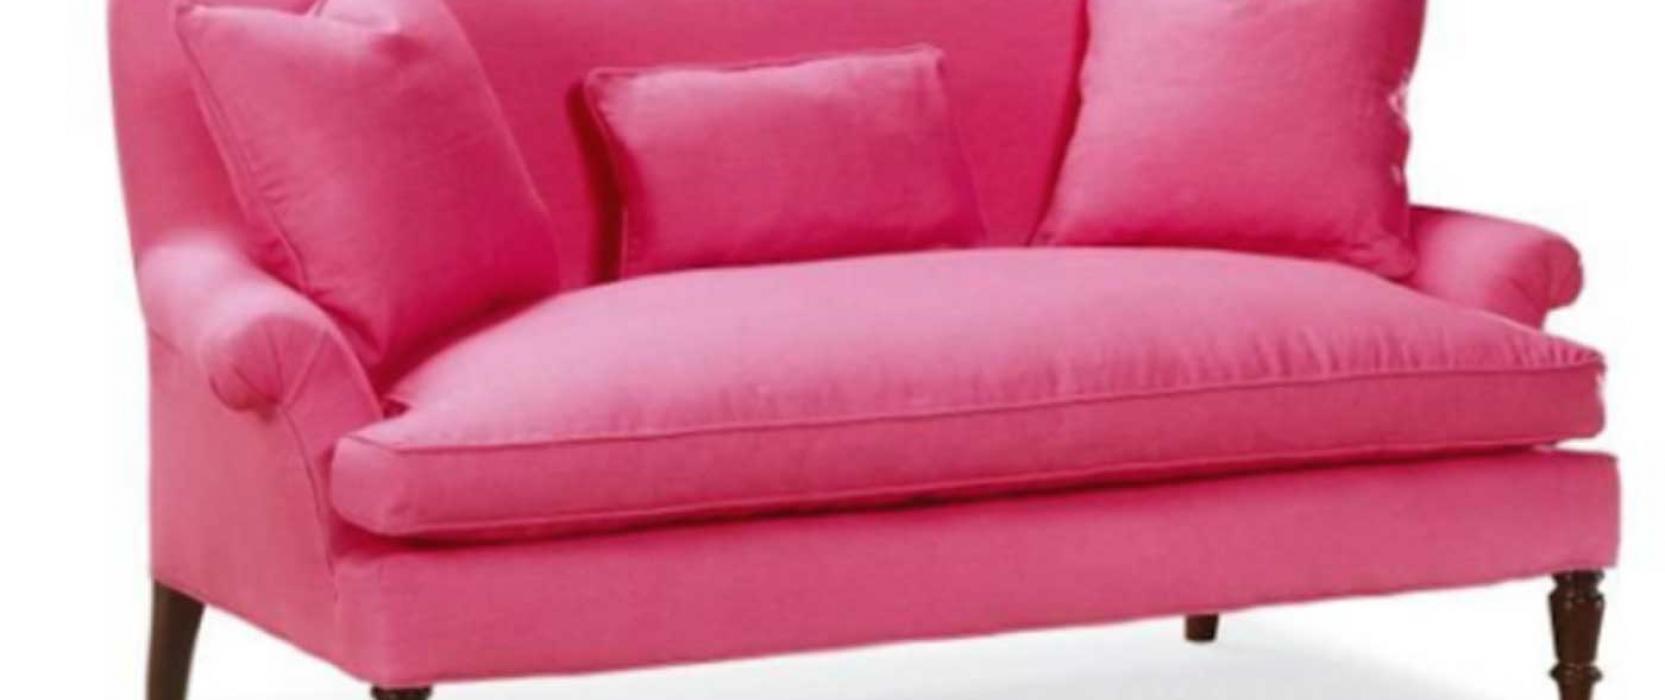 Pink traditional love seat with rolled arms by LEE Industries available at Surroundings Home